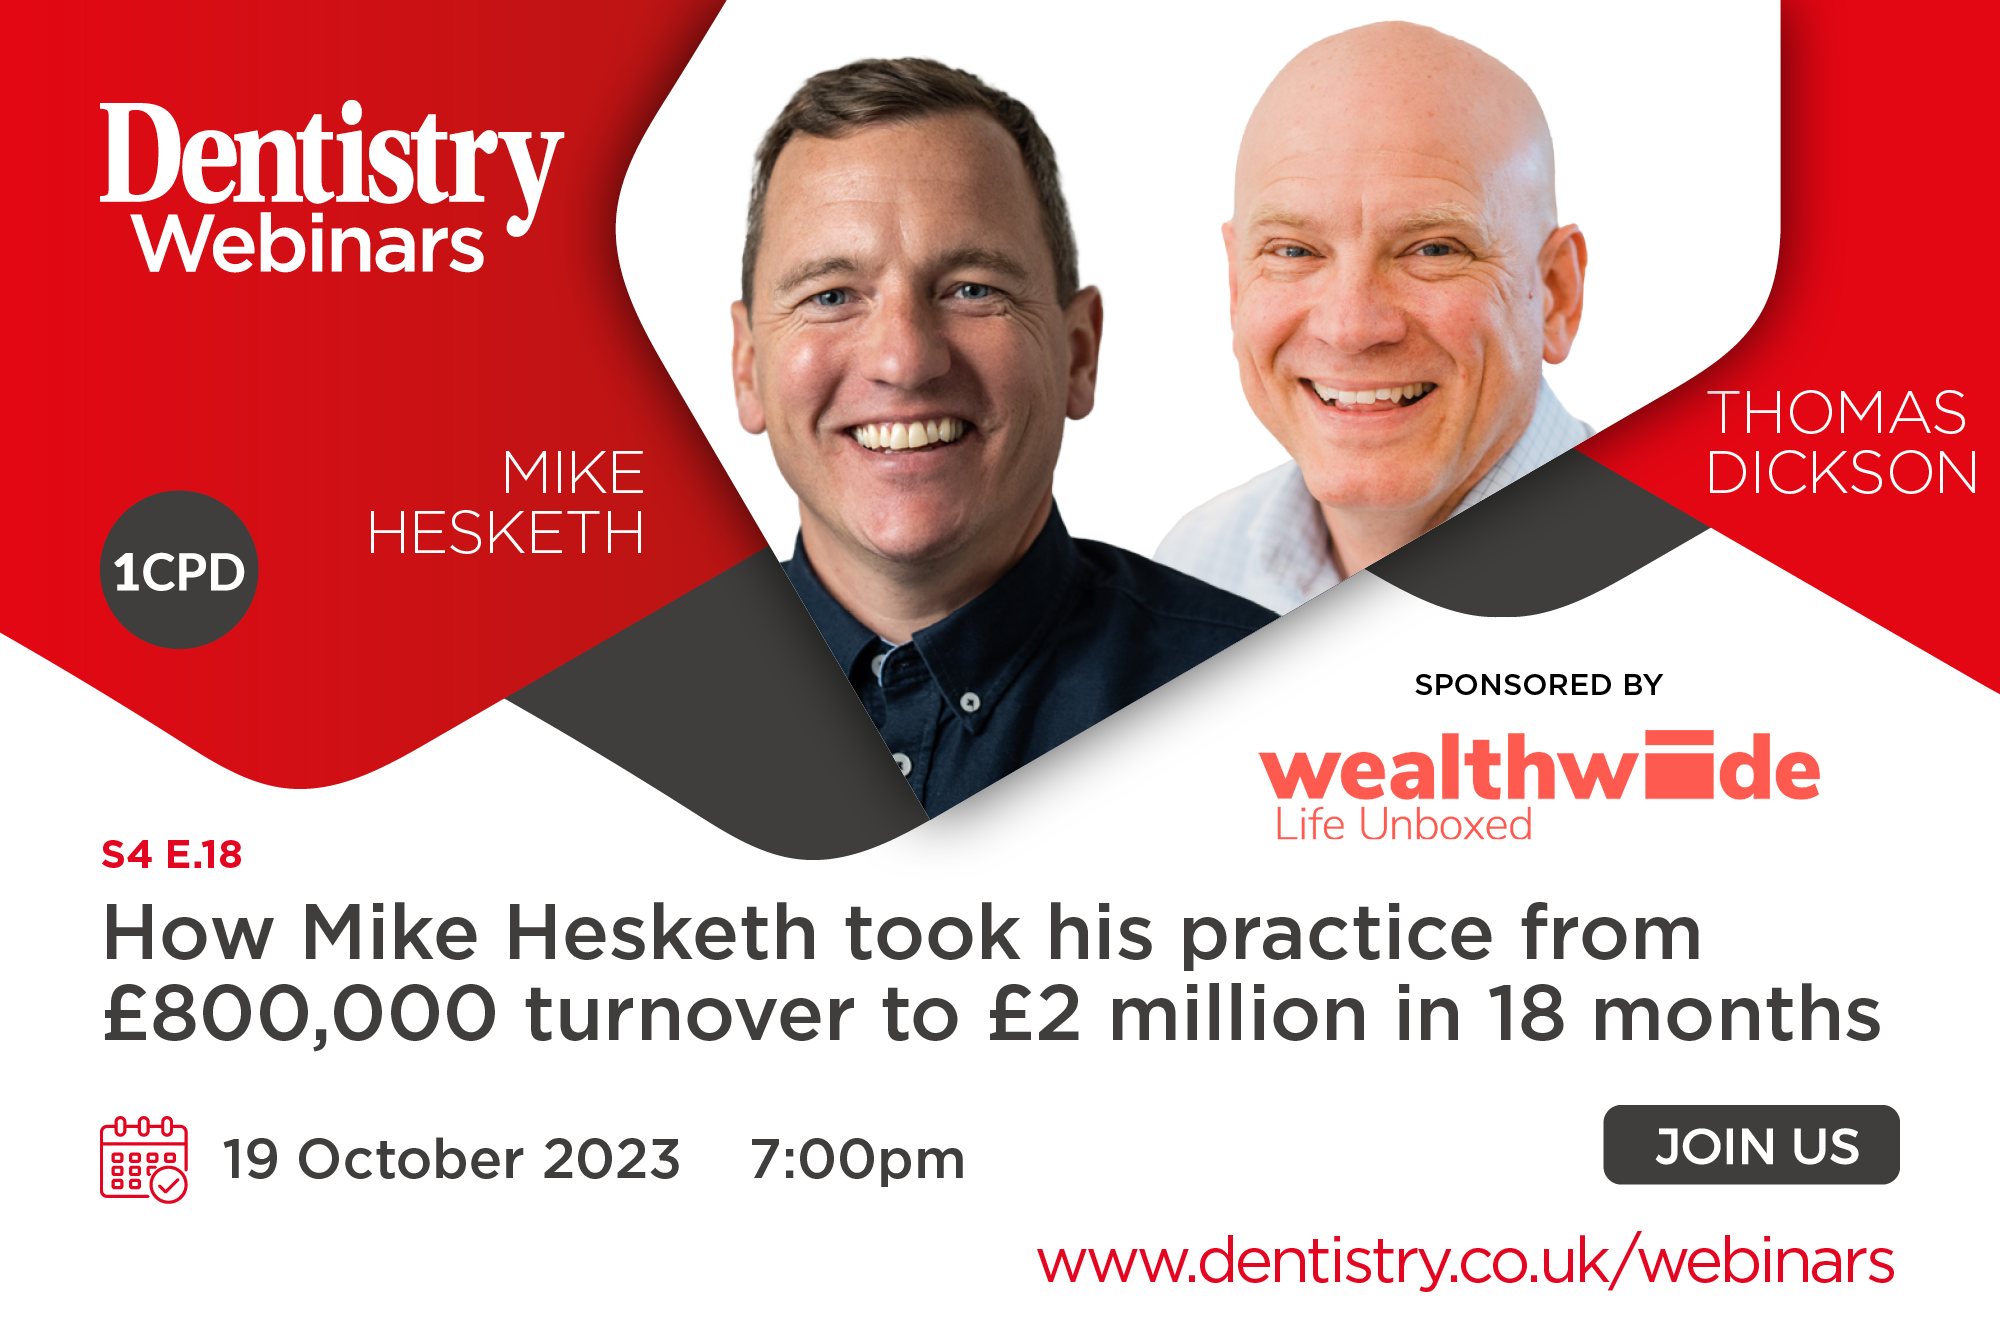 Join Thomas Dickson and Mike Hesketh on Thursday 19 October as they discuss taking a practice from £800,000 to £2 million in 18 months.